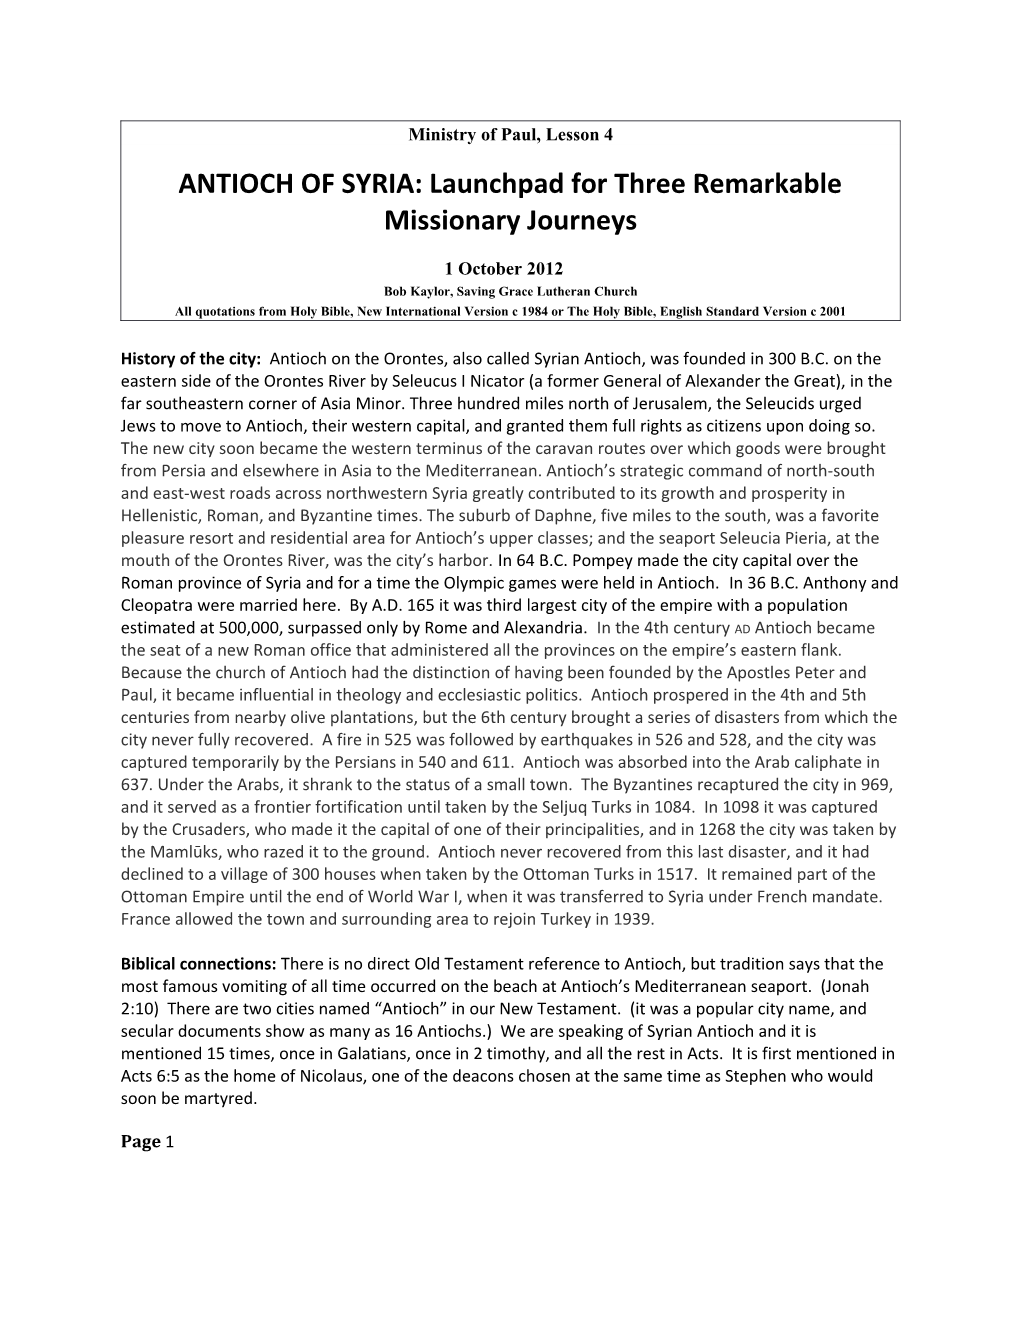 ANTIOCH of SYRIA: Launchpad for Three Remarkable Missionary Journeys